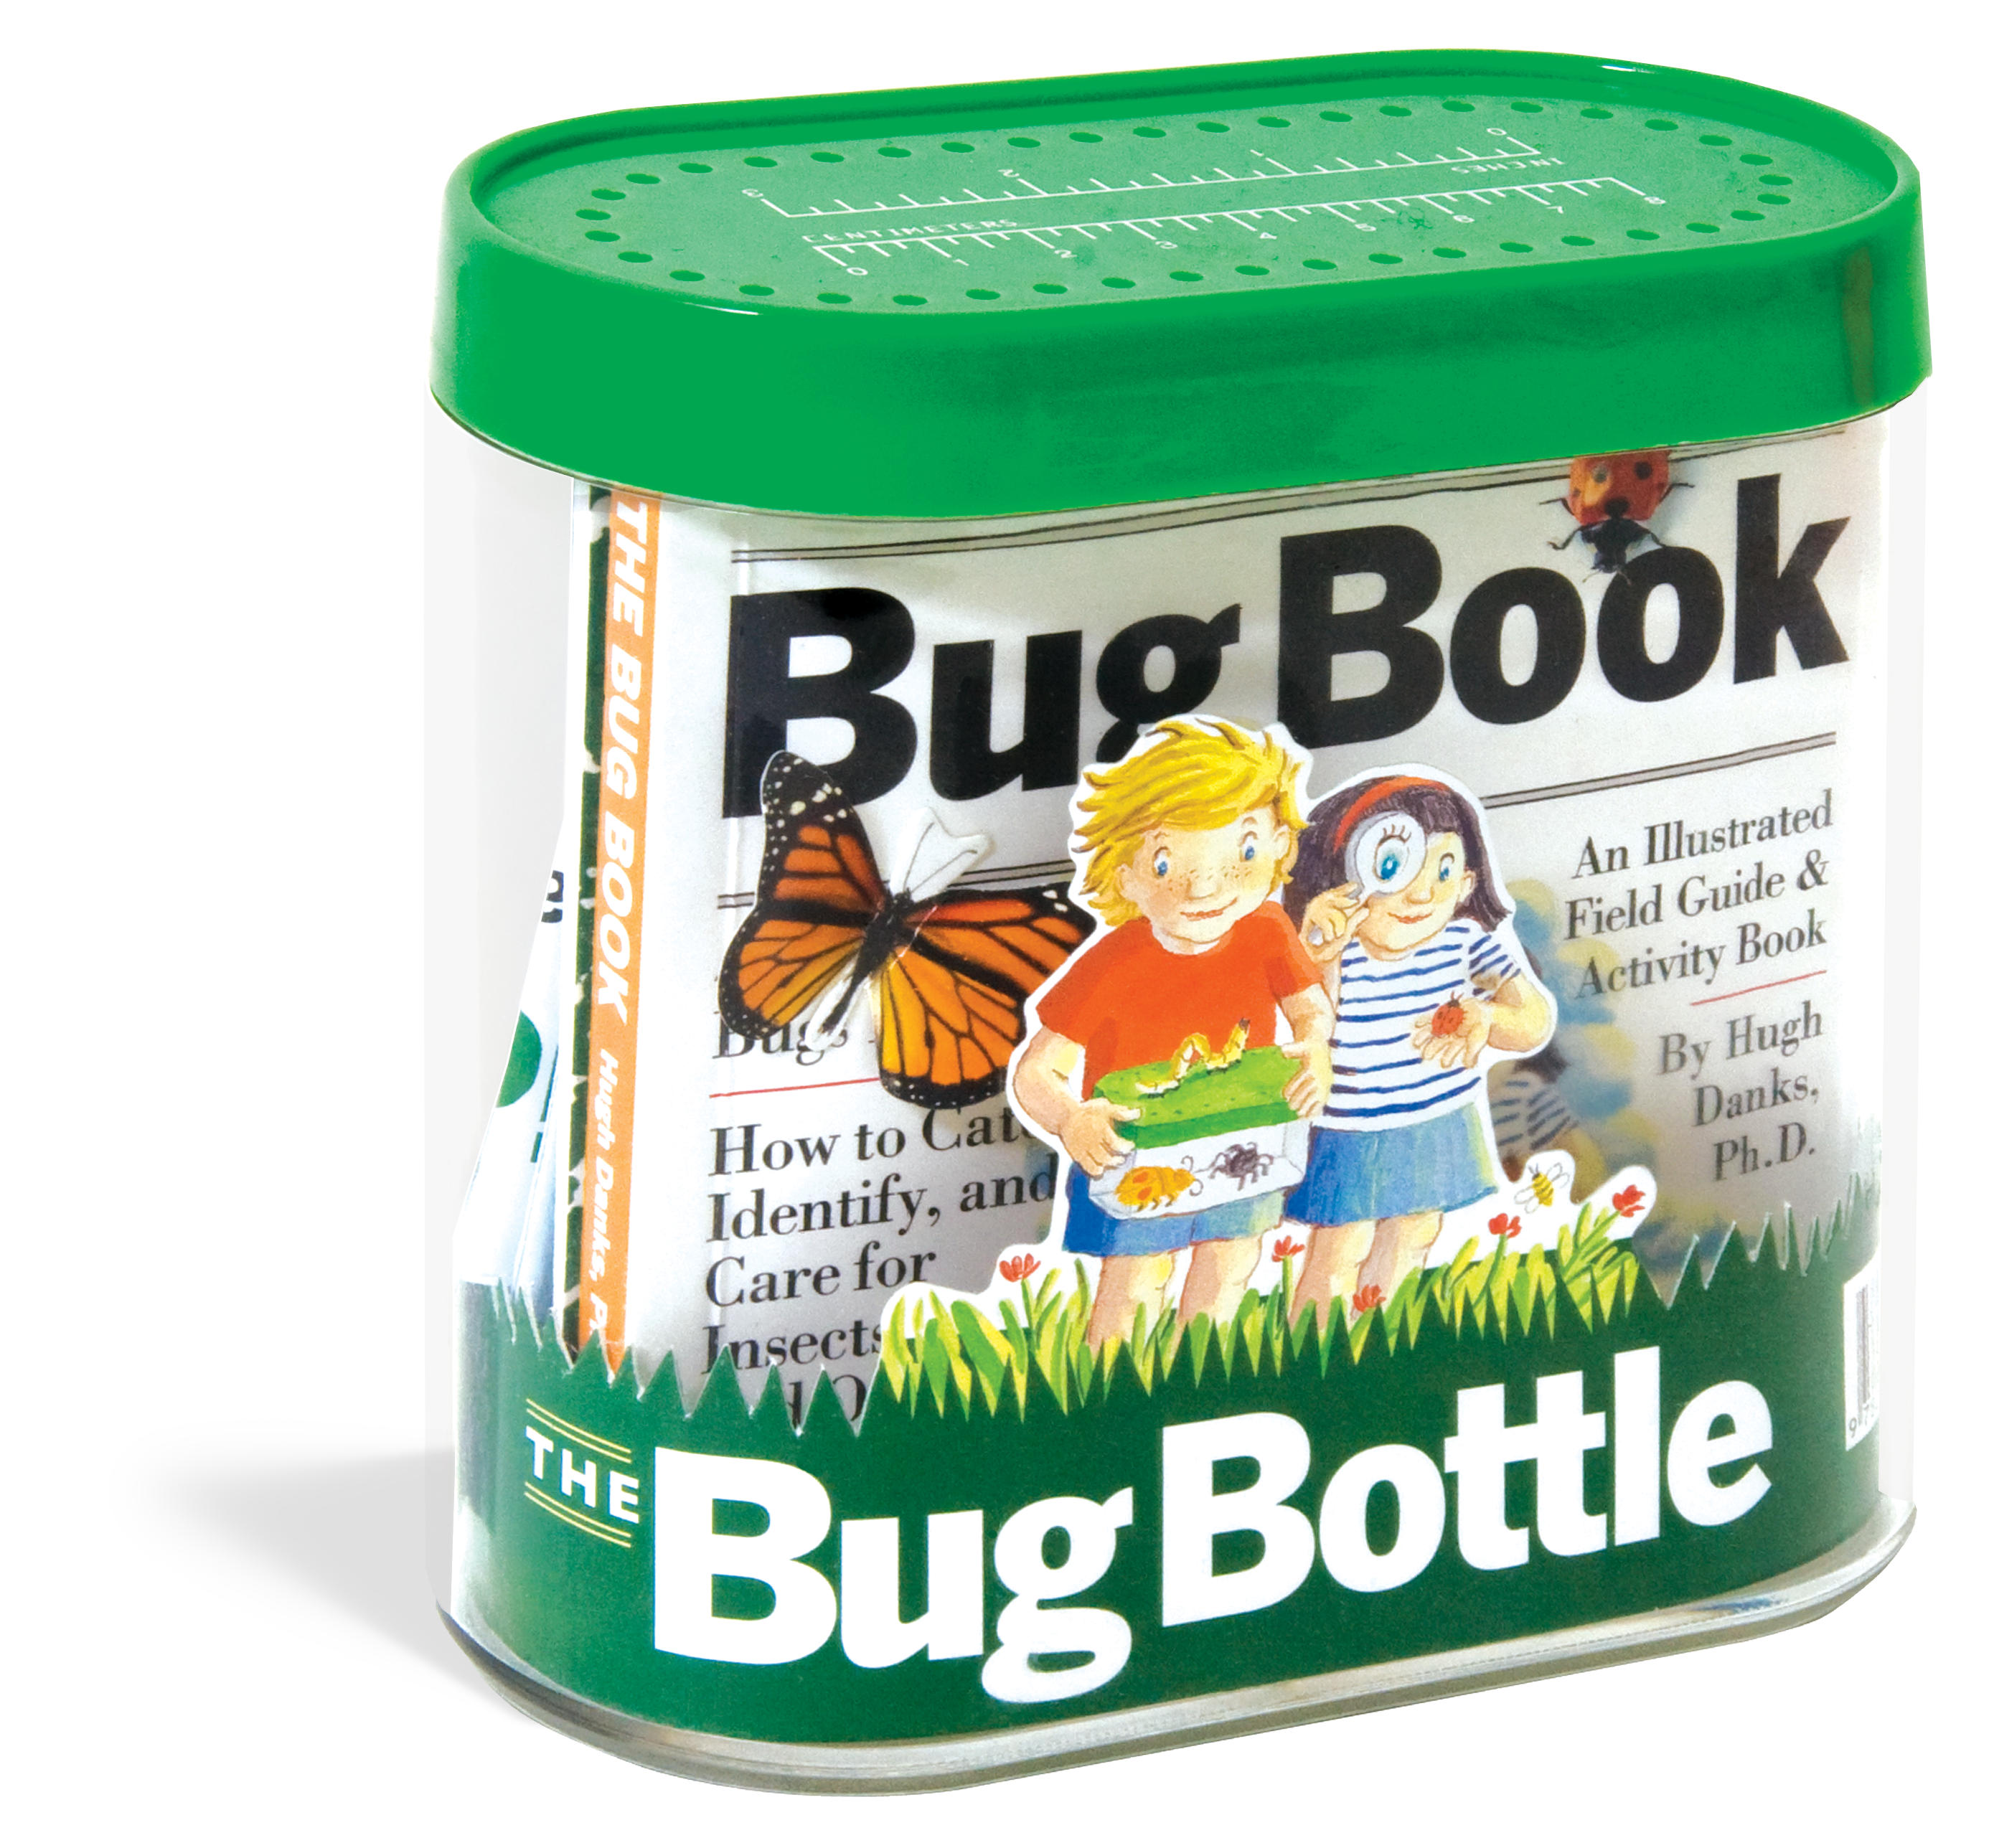 The Bug Book and Bottle Set    